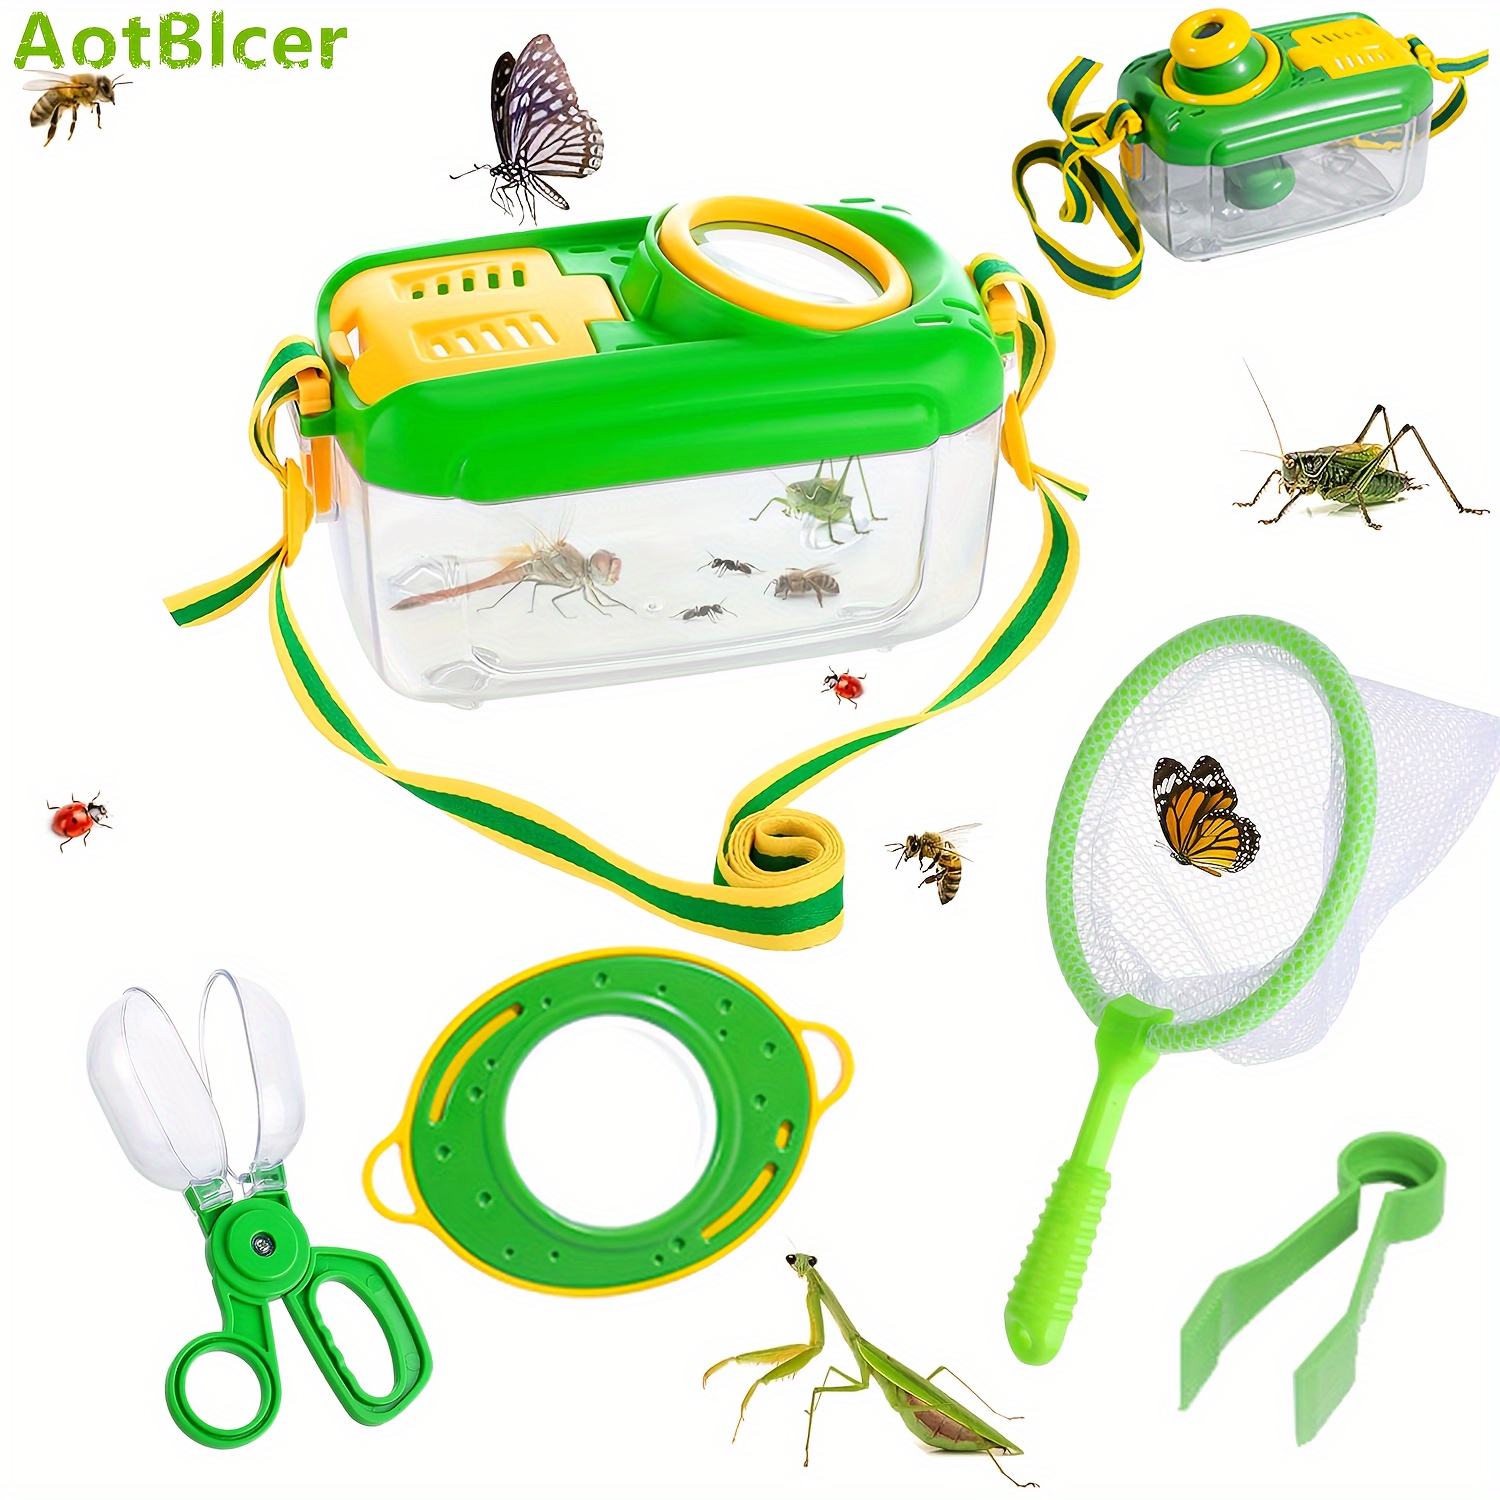 

Aotblcer Kids Nature Exploration Kit – 5 Piece Durable Insect Catching Set With Habitat, , Tweezers – Educational Outdoor Adventure Toy For Boys & Girls Aged 3-6 Years Old